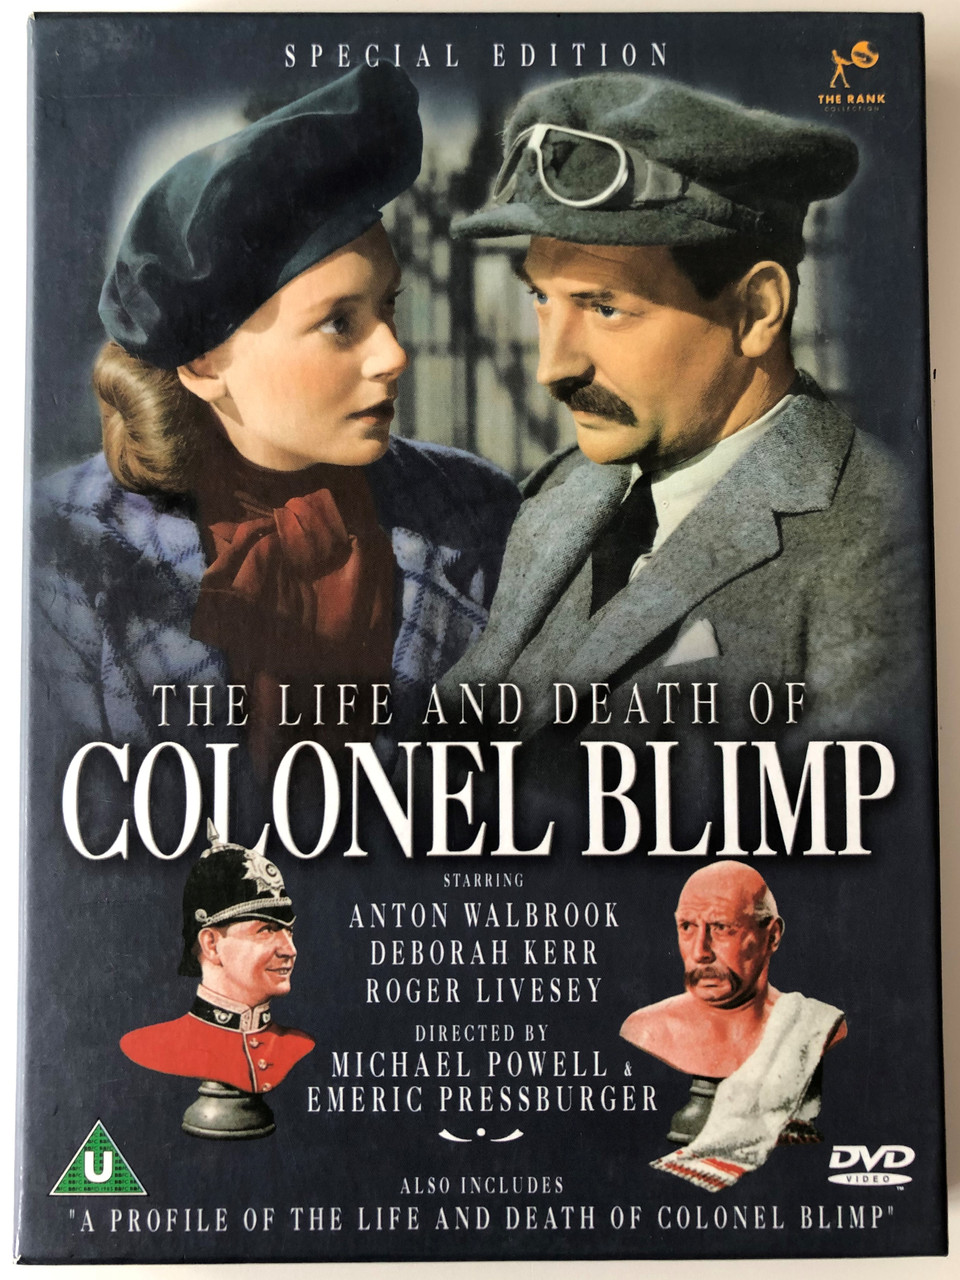 The Life and Death of Colonel Blimp DVD 1943 Special Edition / Directed by Michael  Powell, Emeric Pressburger / Starring: Anton Walbrook, Deborah Kerr, Roger  Livesey - bibleinmylanguage